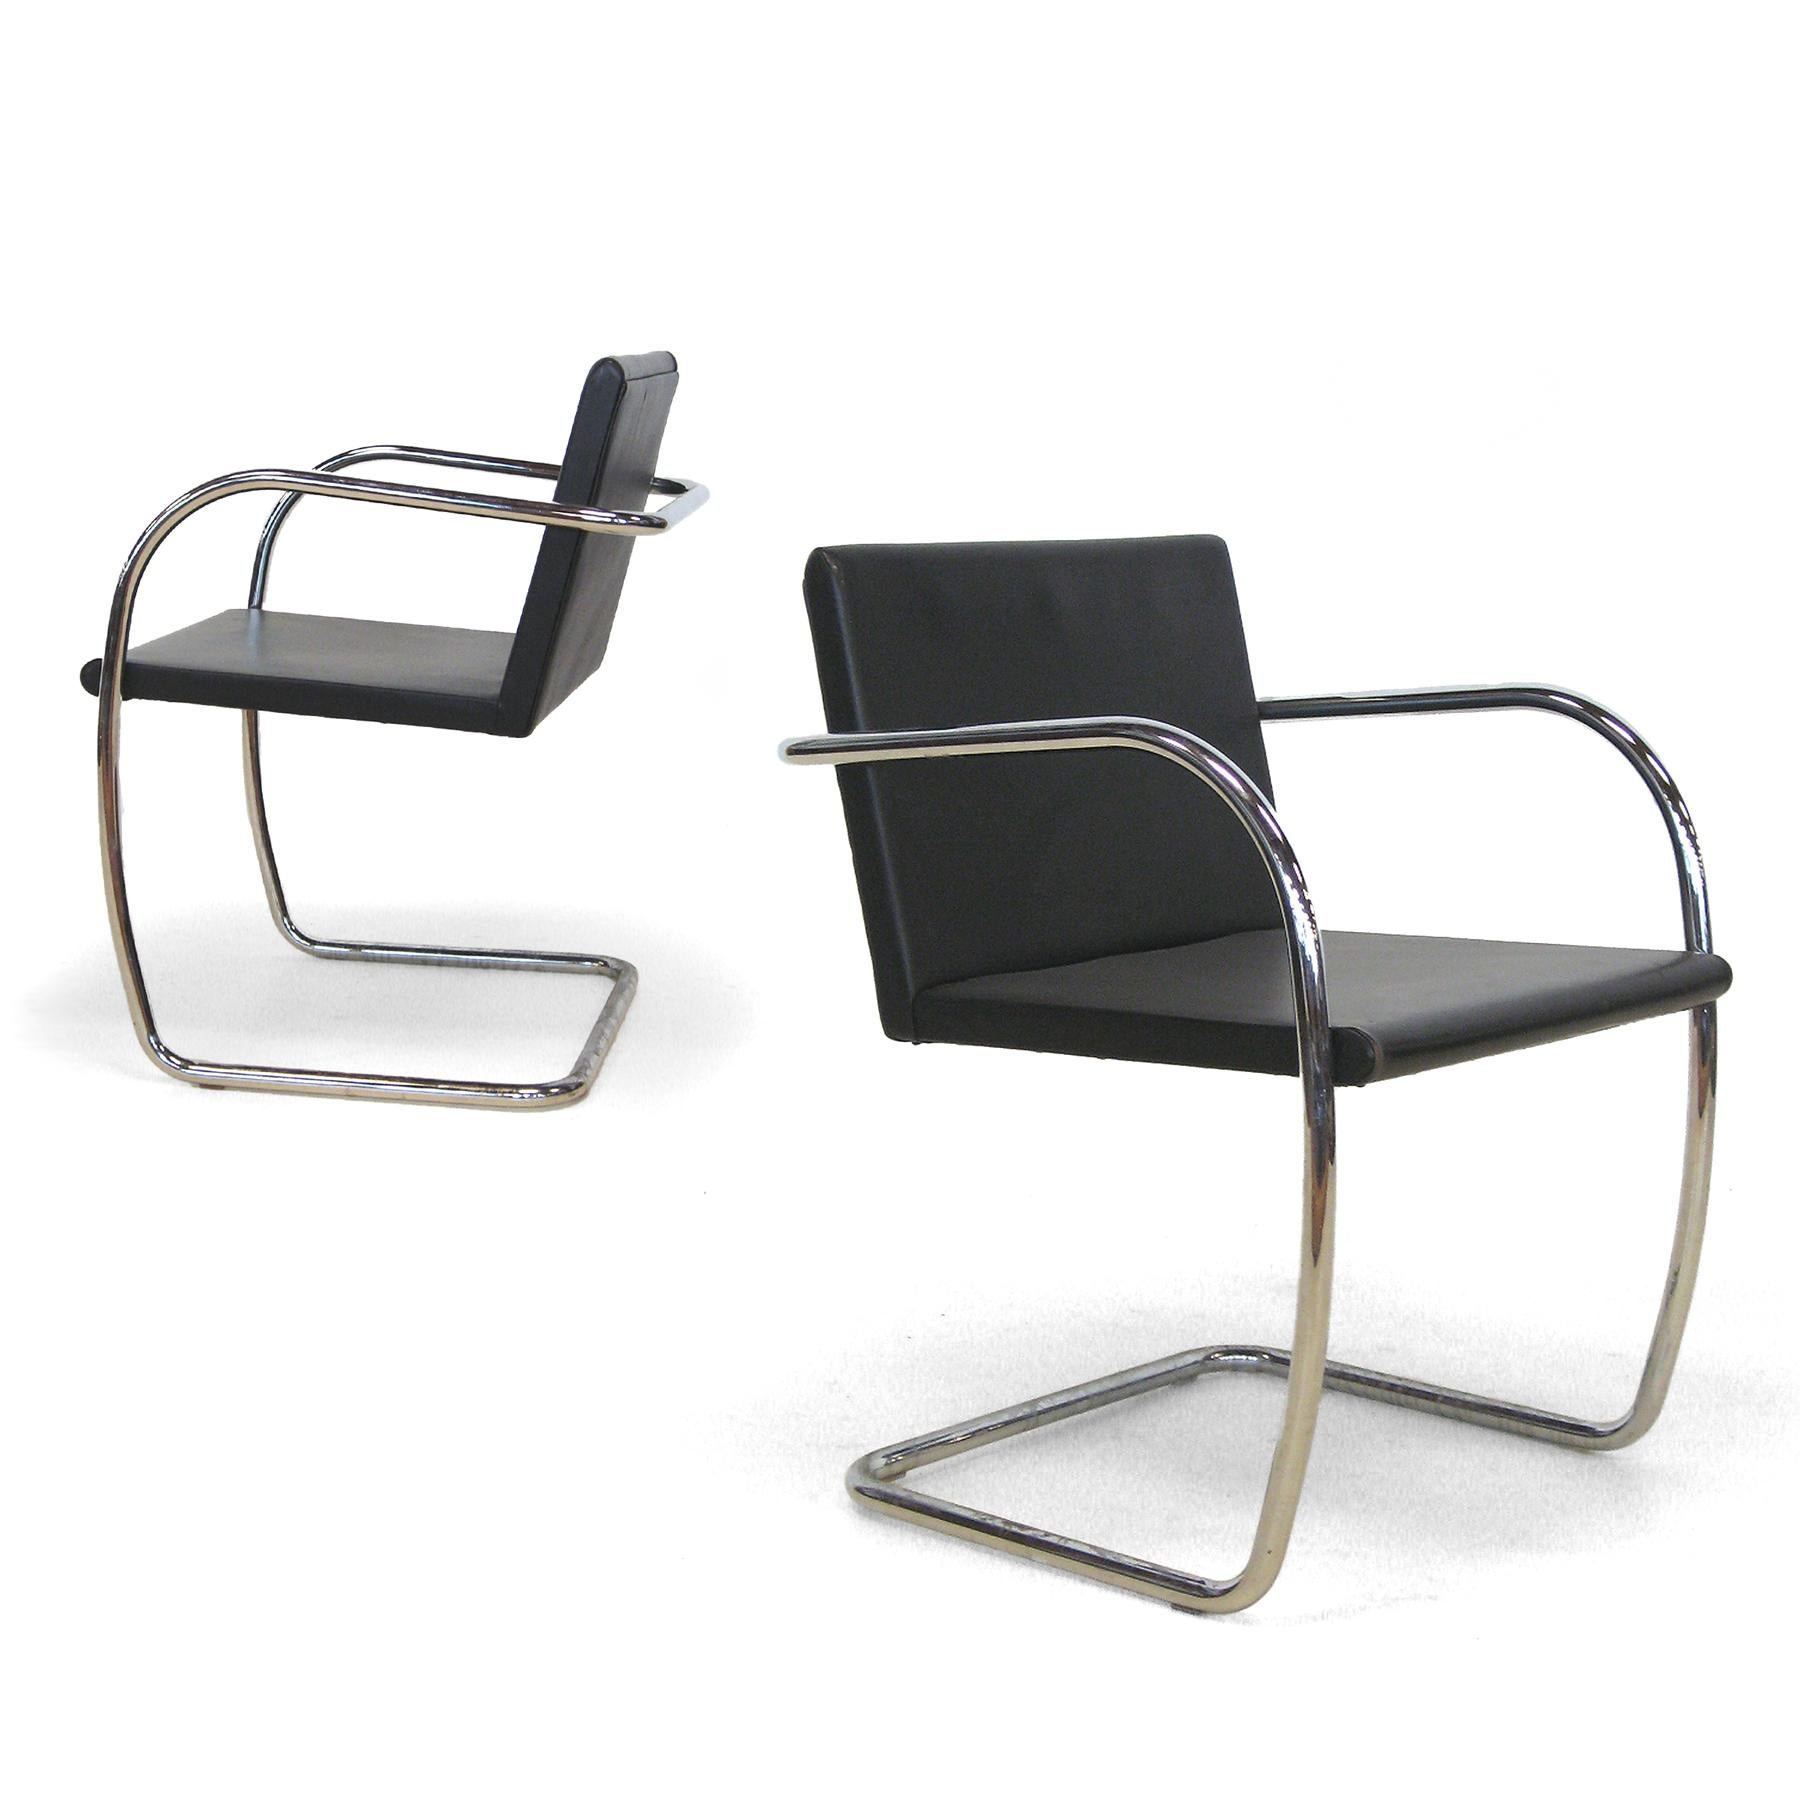 We think this version of Mies' Brno chair with it's thin seat and back is the most elegant and comes closest to his minimalist ideal. Upholstered in black leather, this pair is in good original condition.

Measures:31.25